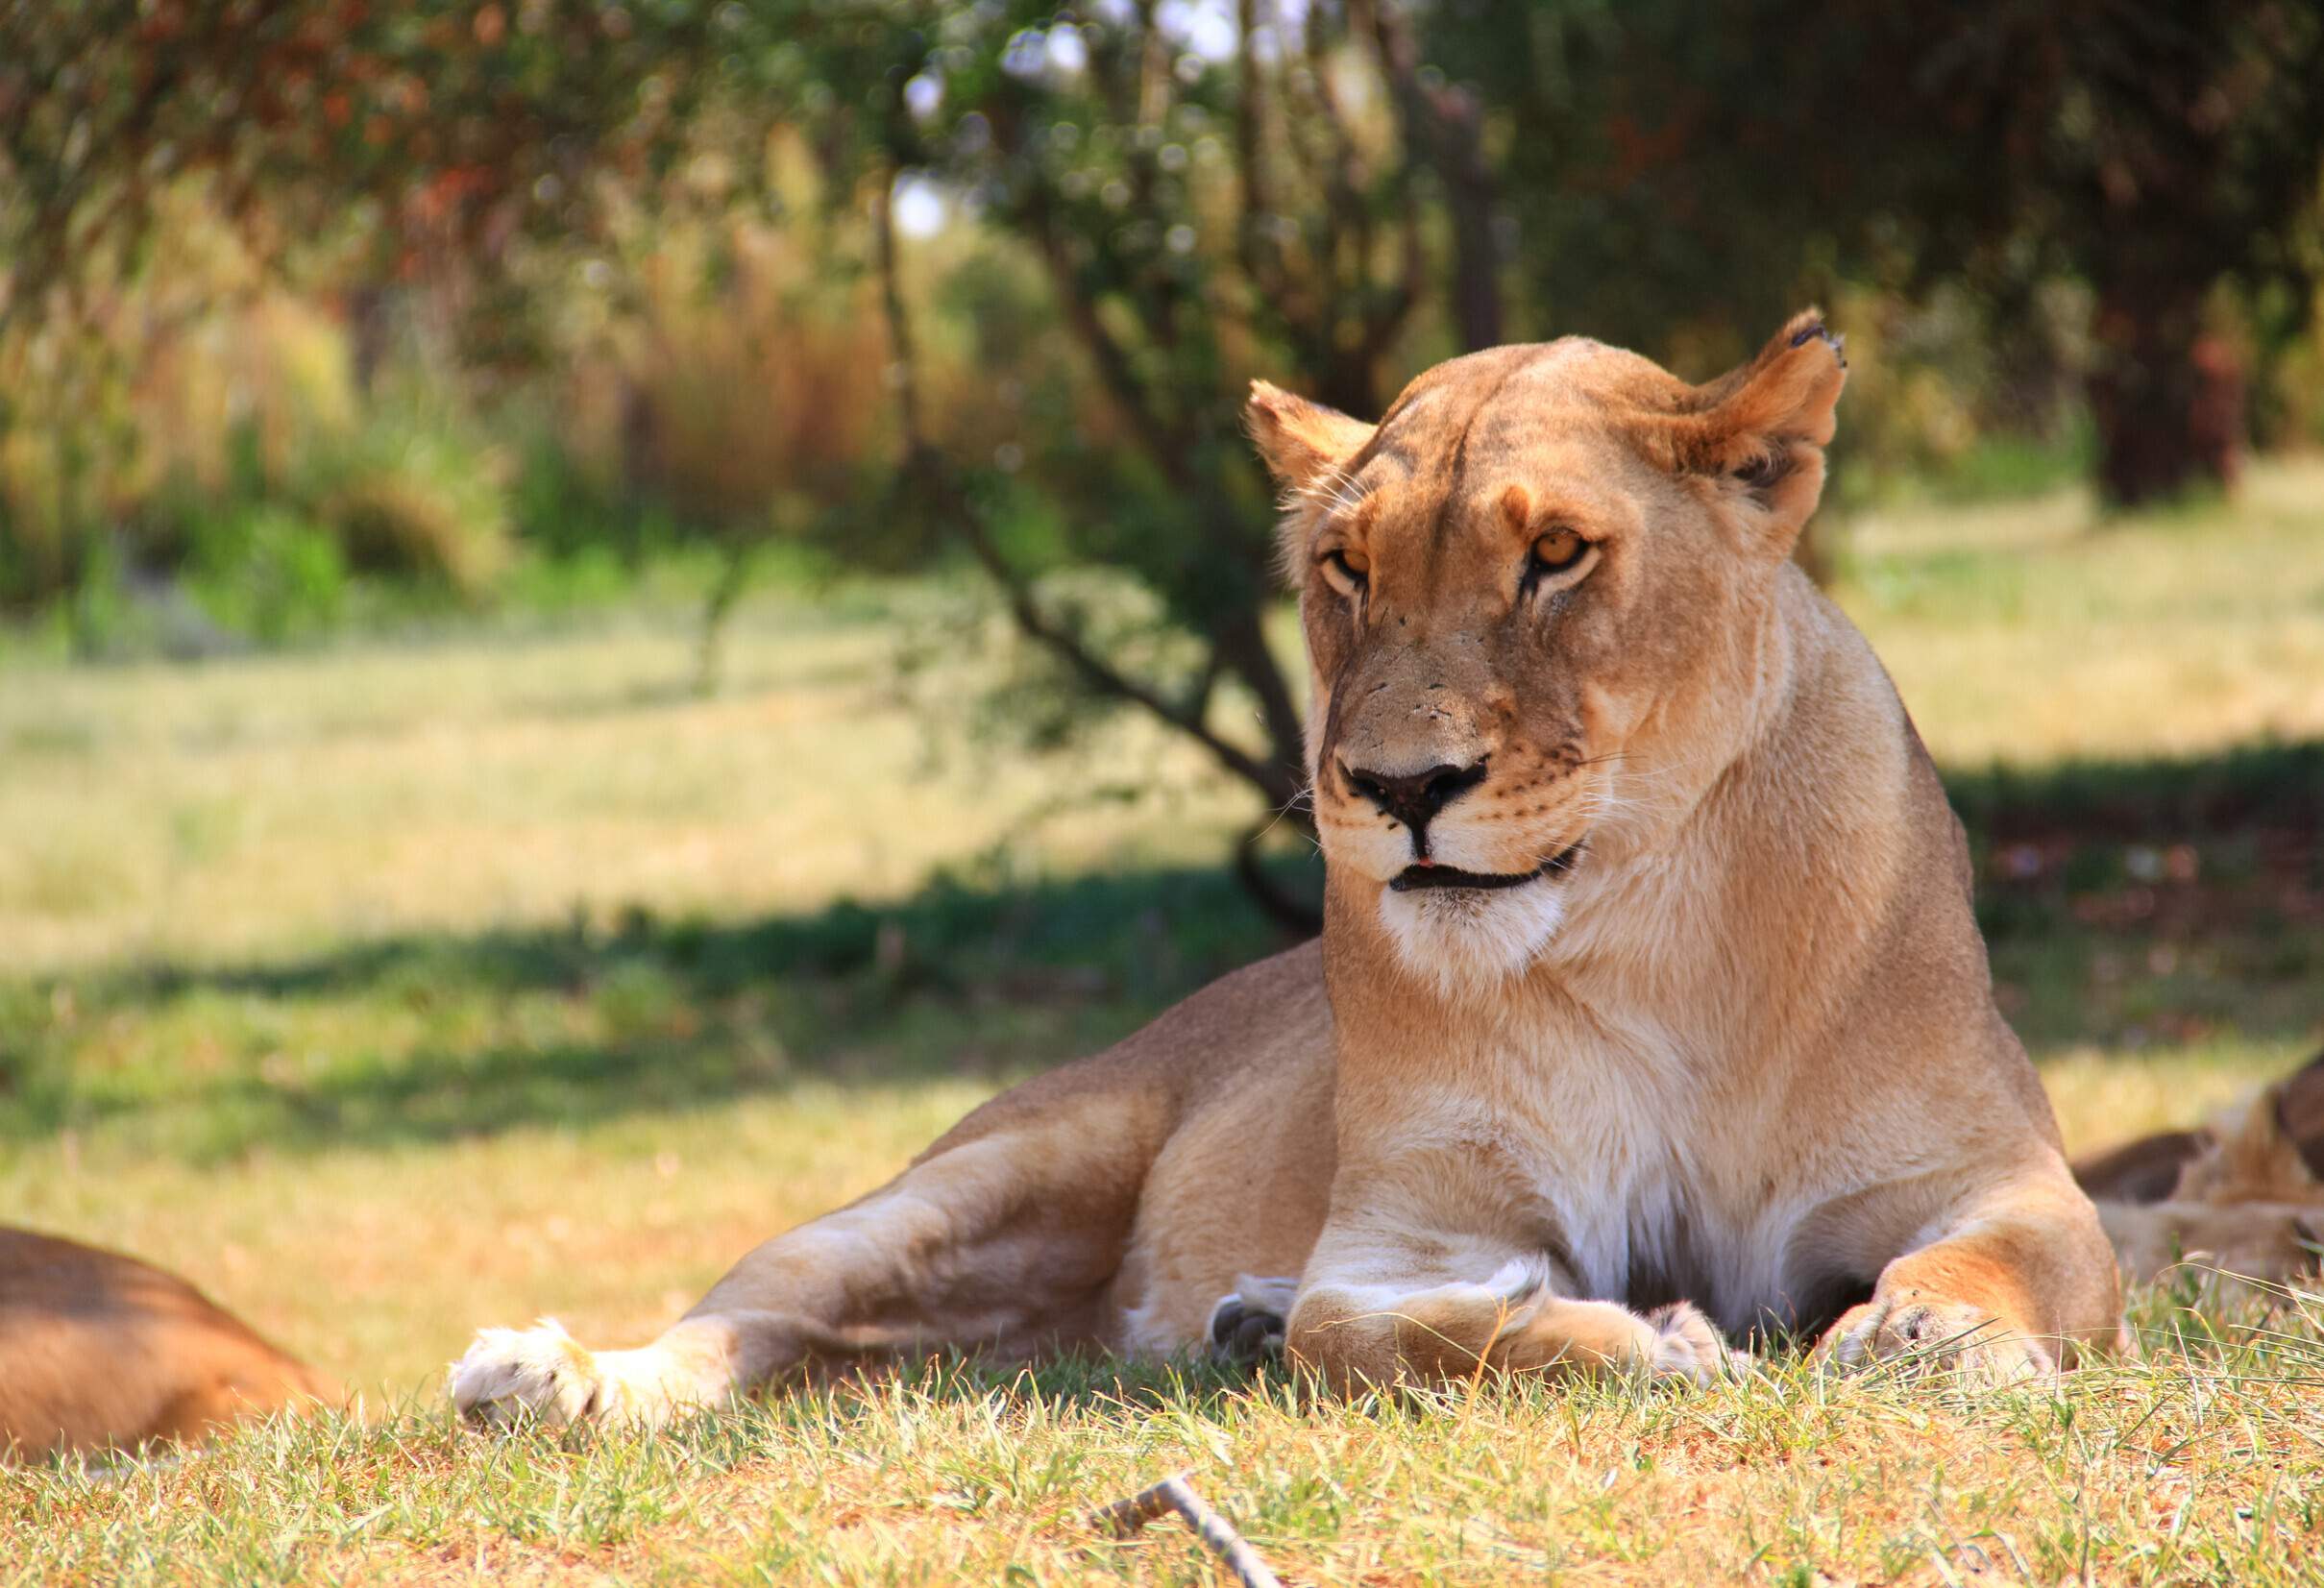 A lioness rest in the grassy landscape in the wild.